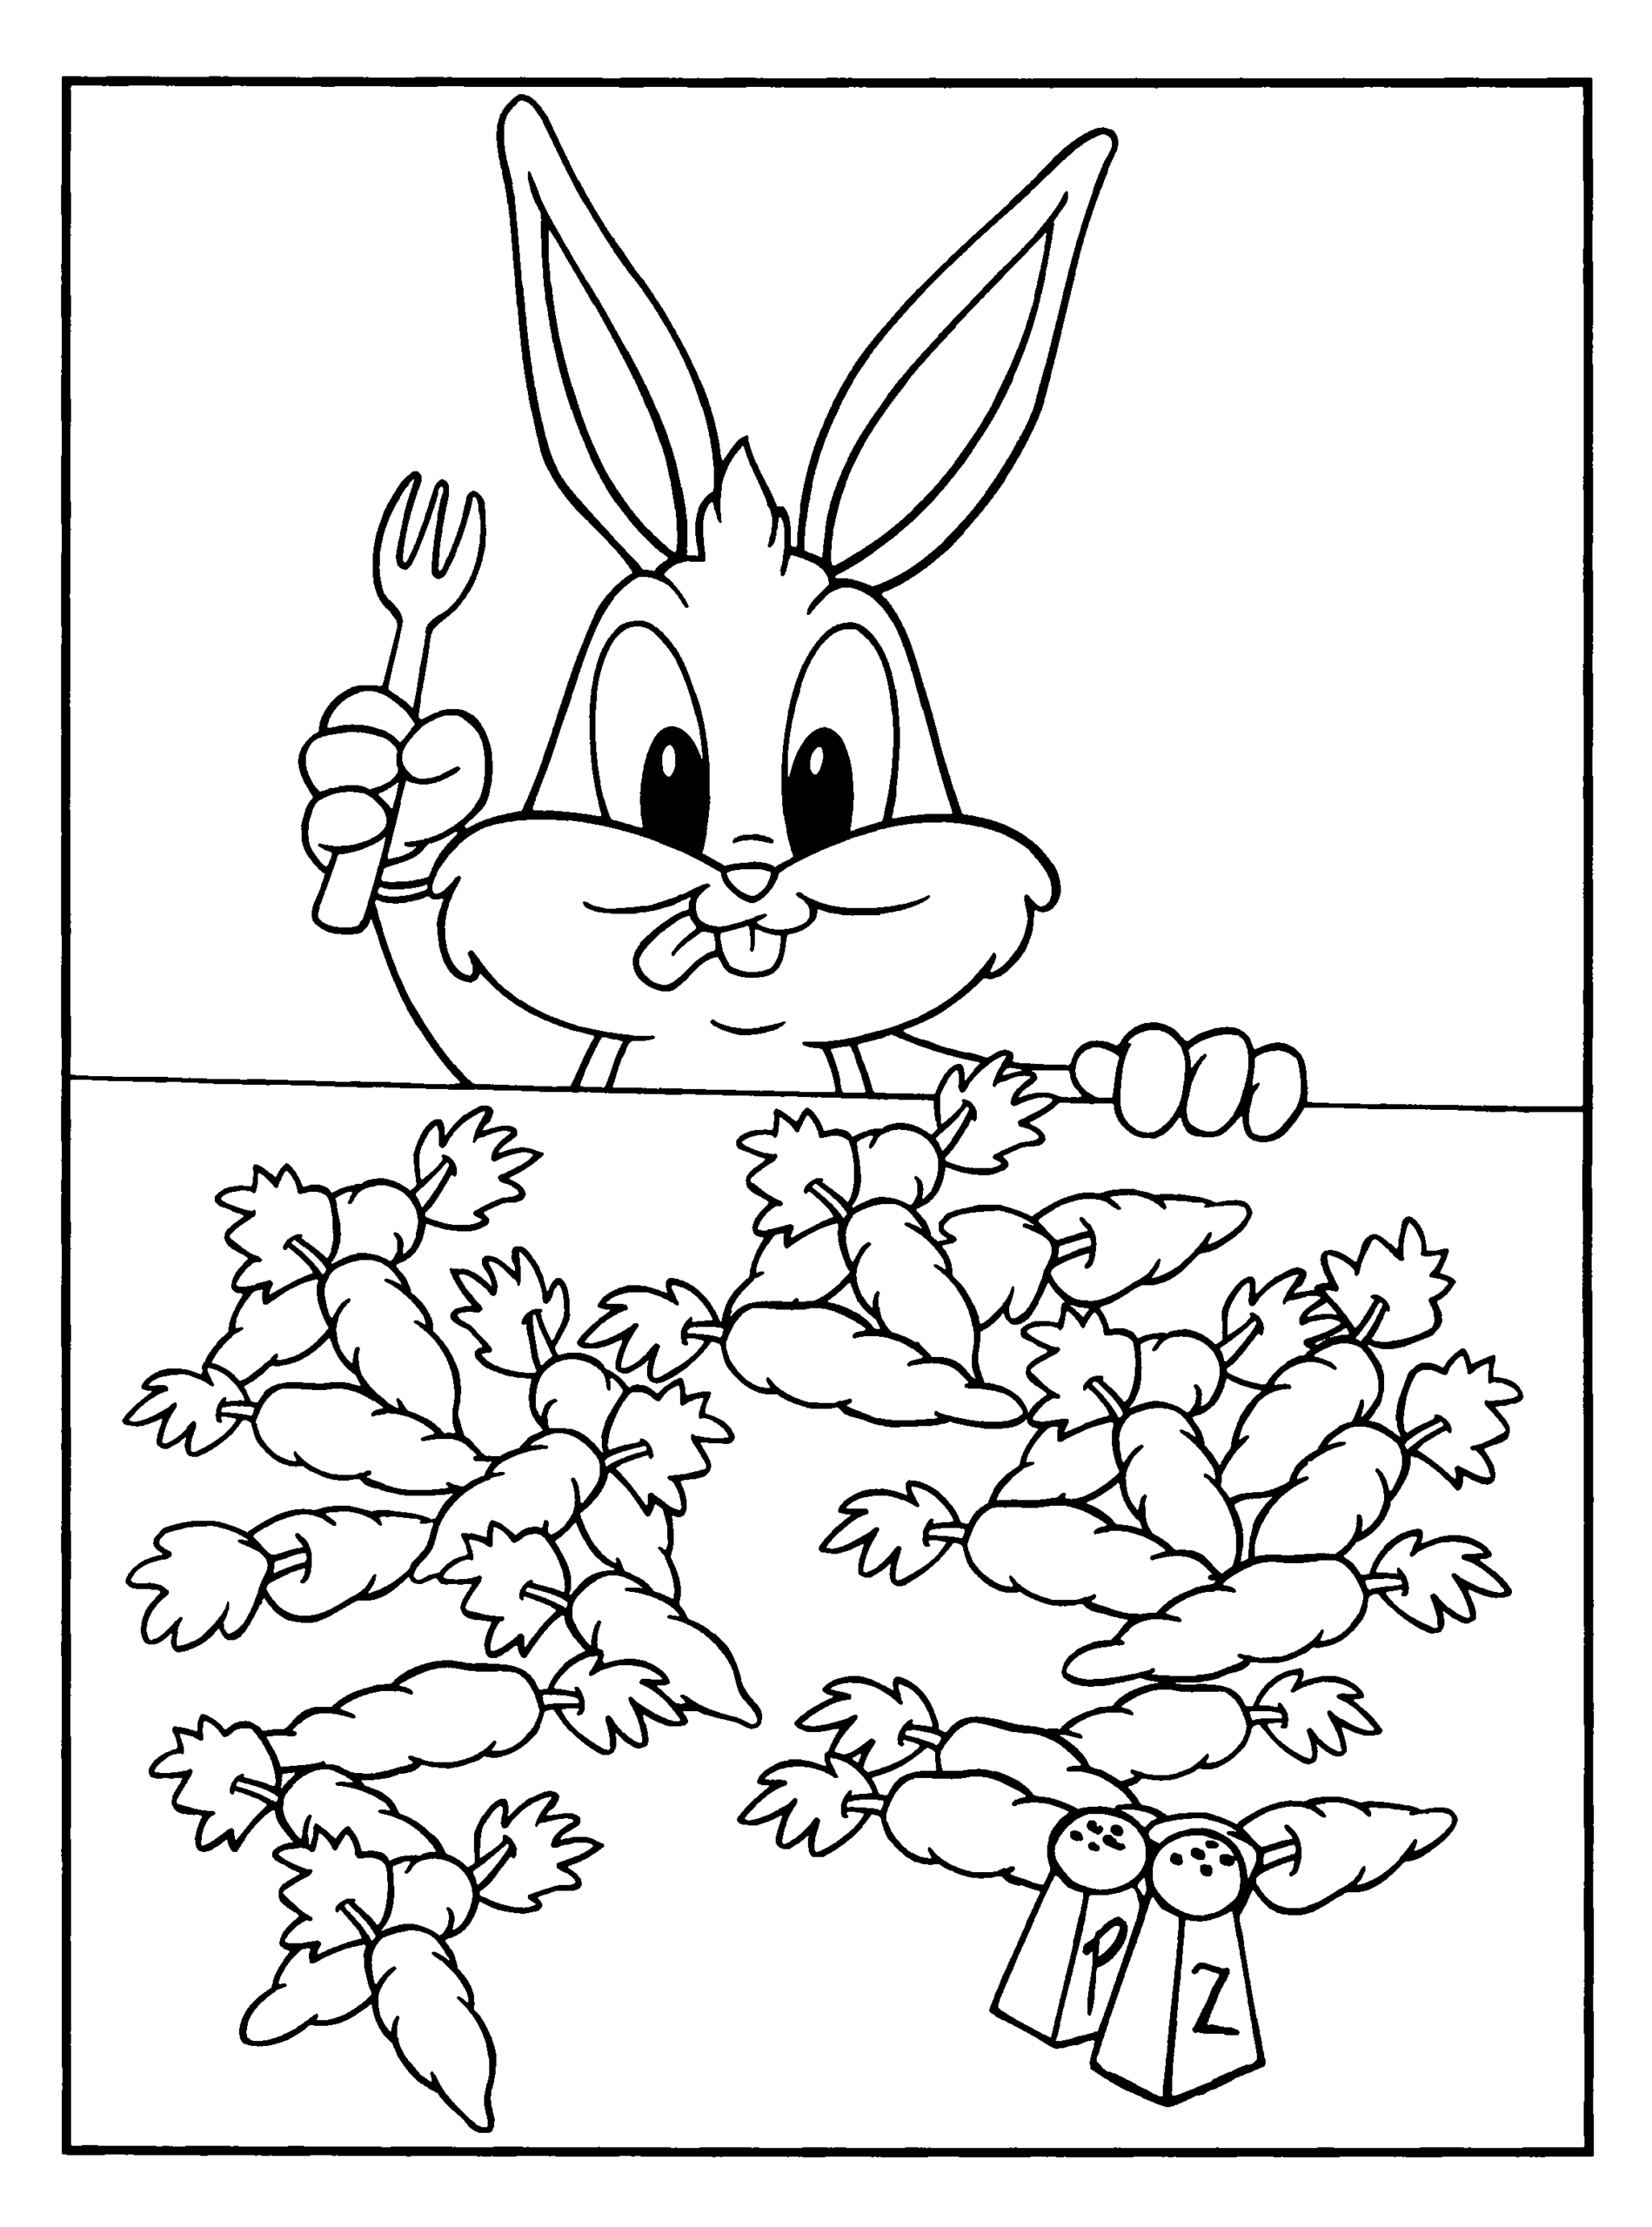 Baby Looney Tunes Coloring Pages TV Film baby looney tunes 21 Printable 2020 00428 Coloring4free